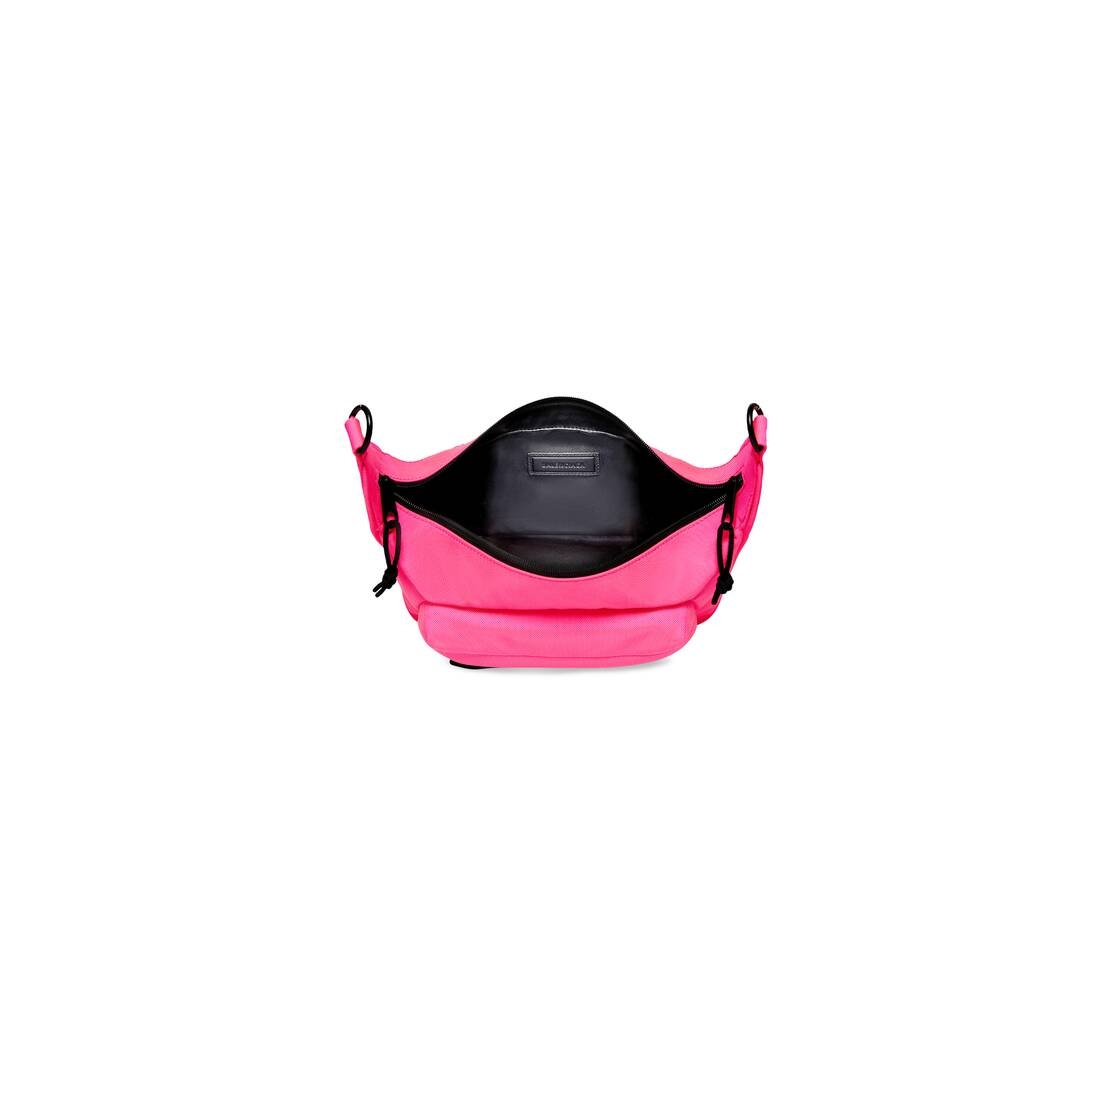 Raver Medium Bag With Chain in Fluo Pink - 7